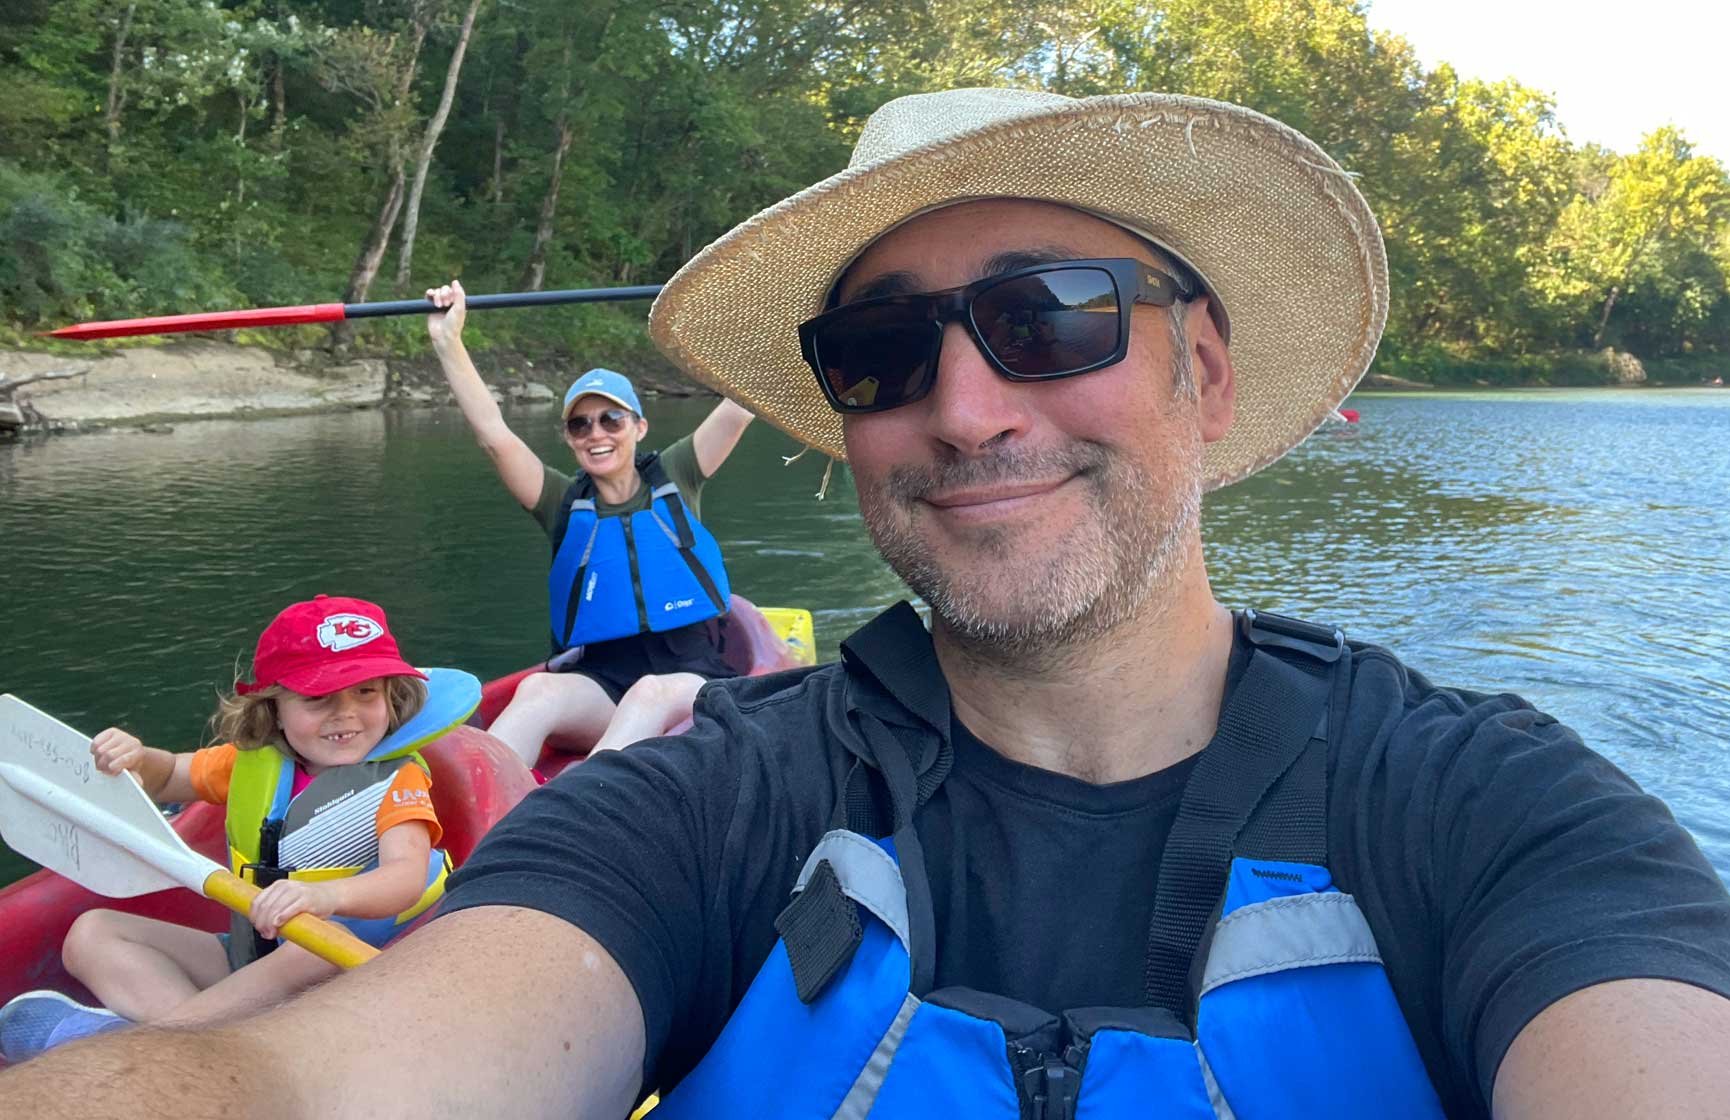 Slalom General Manager Daniel Cross and family selfie of them boating together.